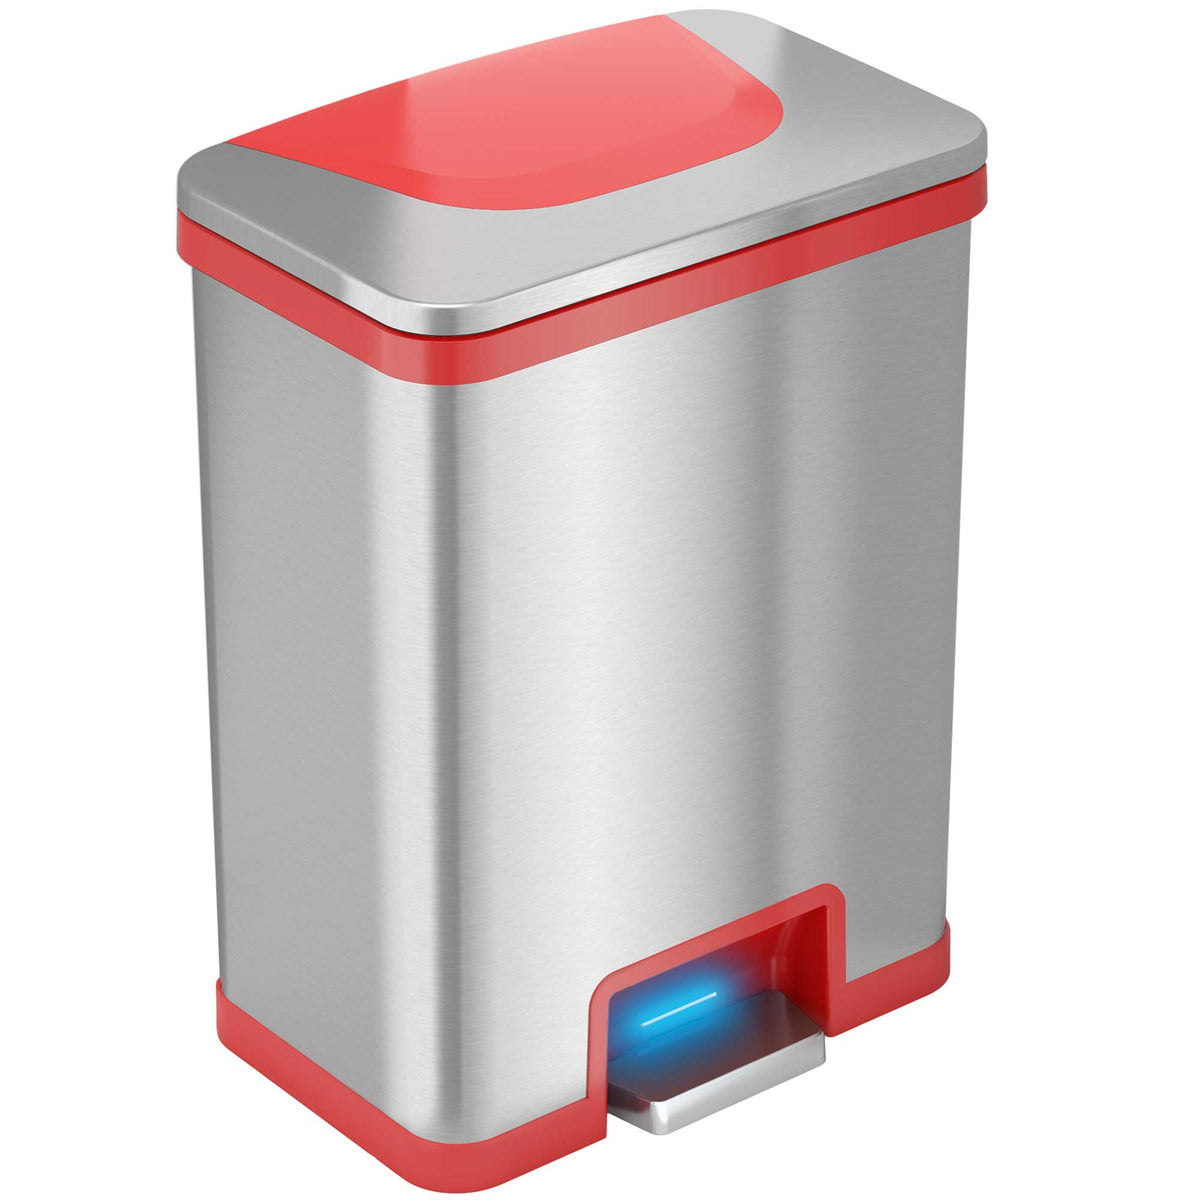 hOmeLabs | Automatic Kitchen Trash Can - 13 Gallon